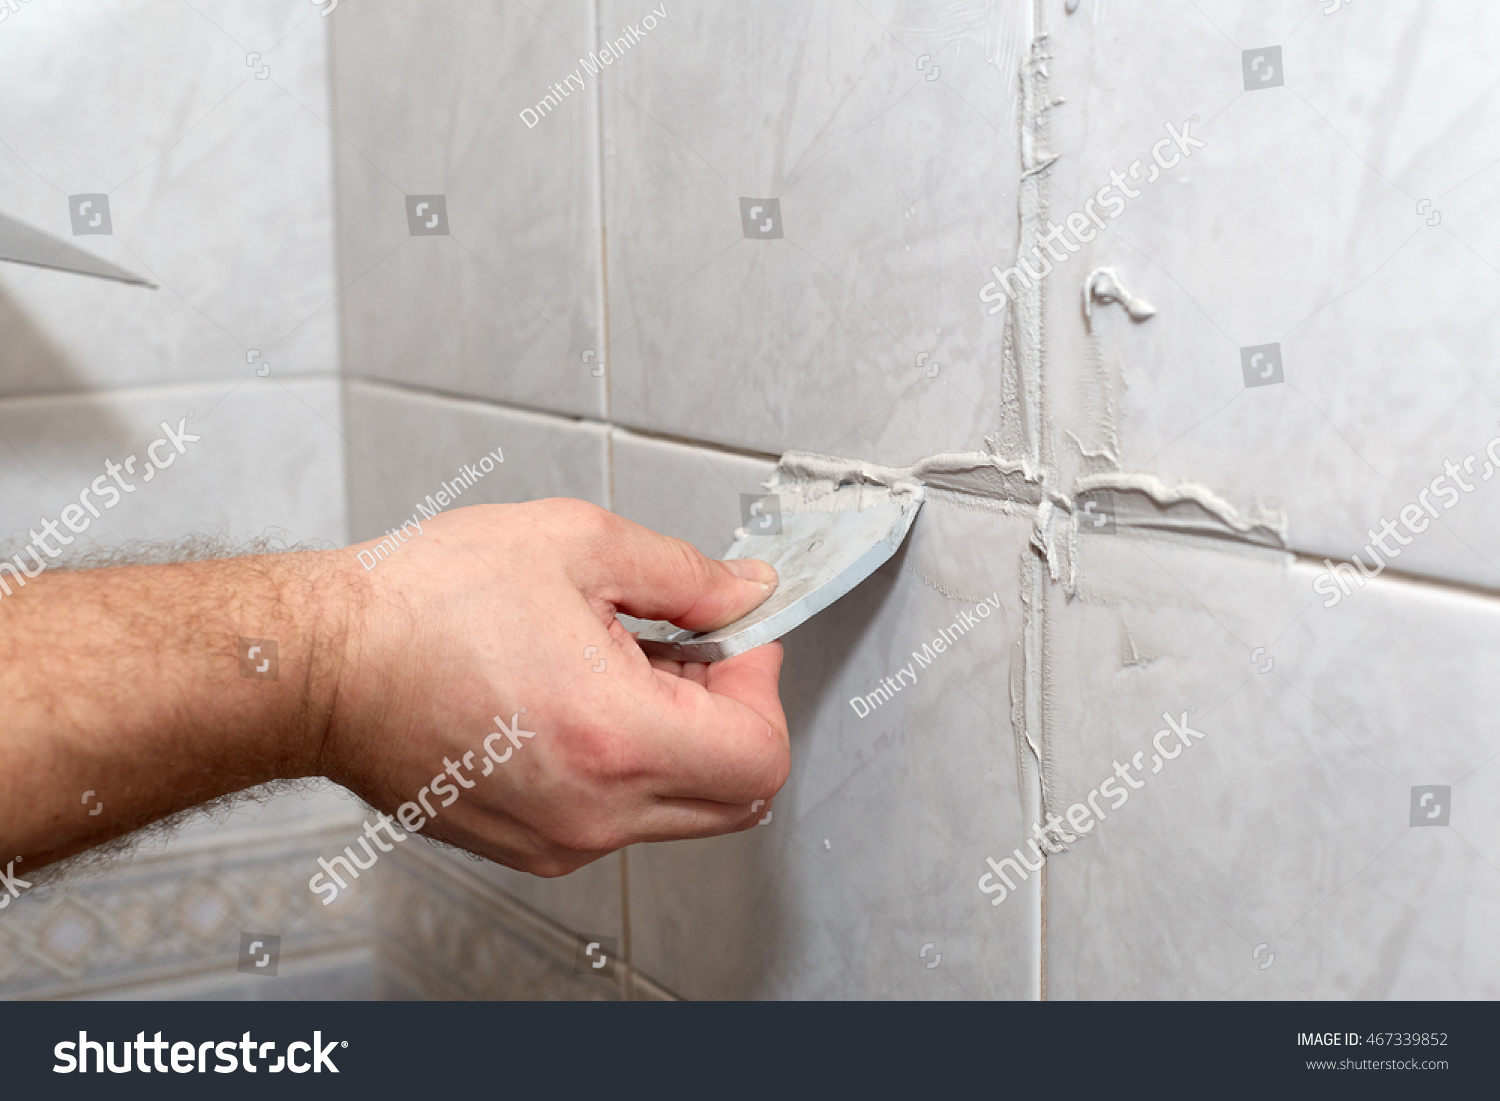 The male hand with the rubber spatula applies grout on a seam between tiles in a bathroom. Home repairs. #467339852